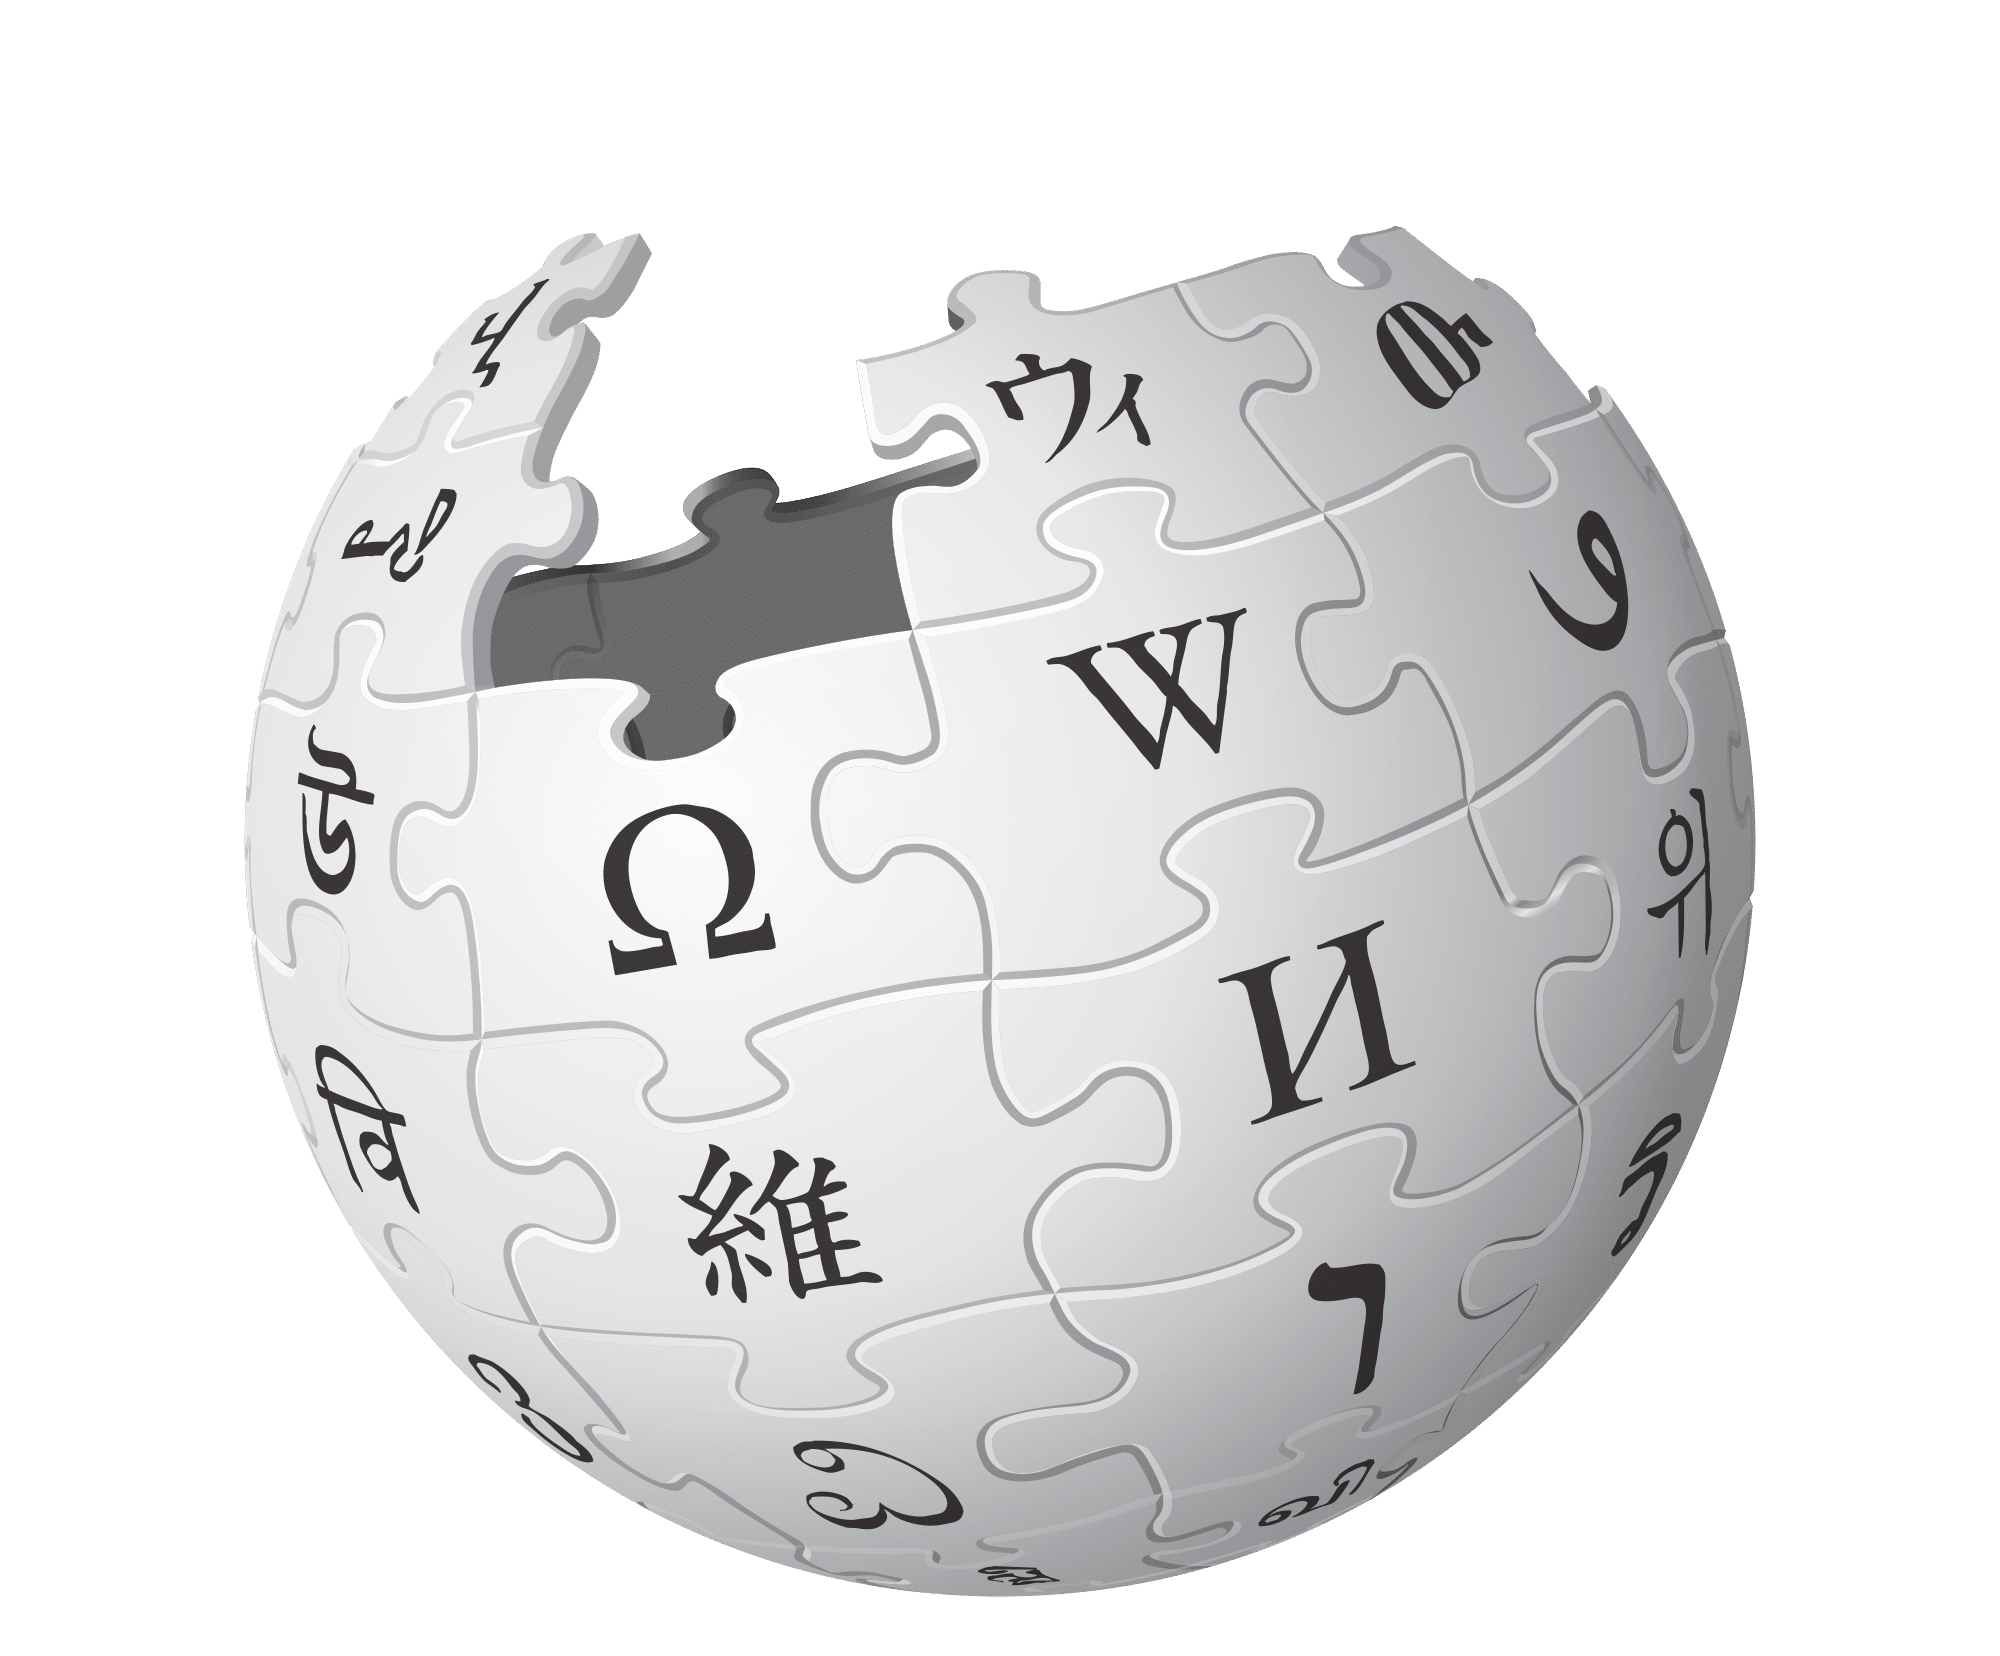 Opinion: Should students be allowed to use Wikipedia?